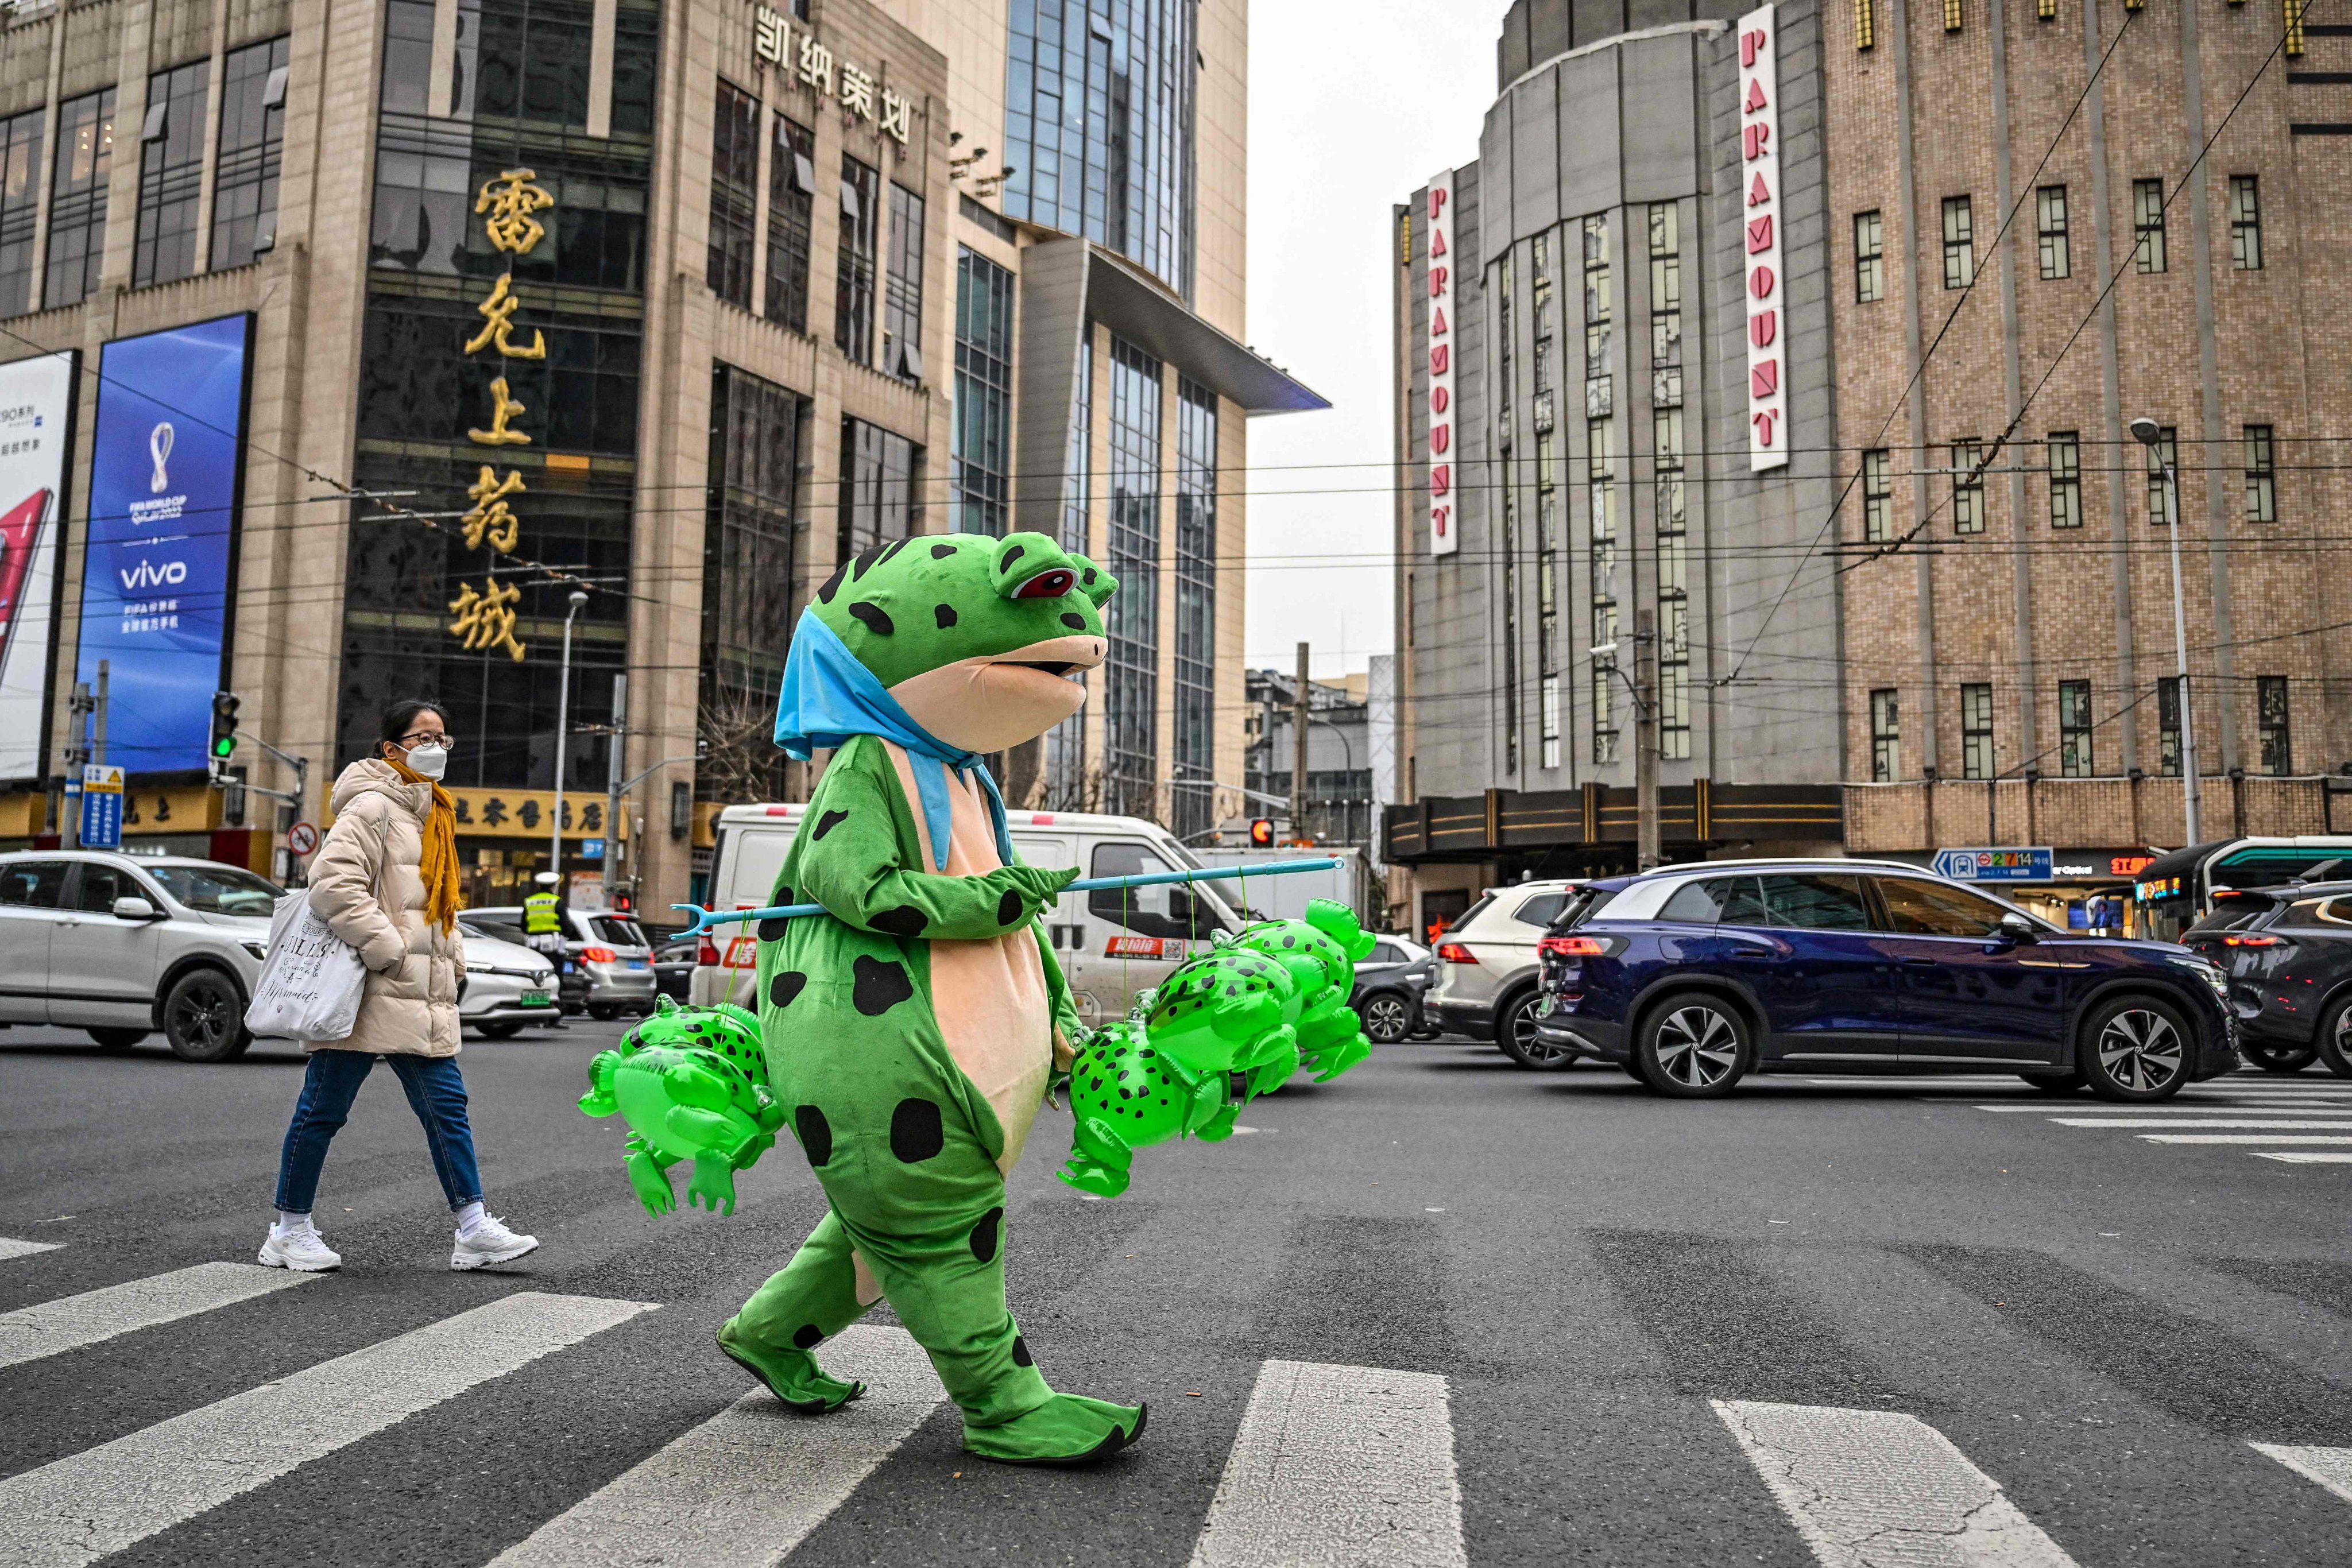 A person dressed in a costume walks on a street as they sell inflatable plastic figures in the Jingan district in Shanghai on February 22. The effects of China’s reopening and its associated economic impulse are expected to drive a surge in domestic demand that will lift the Chinese and global economies. Photo: AFP